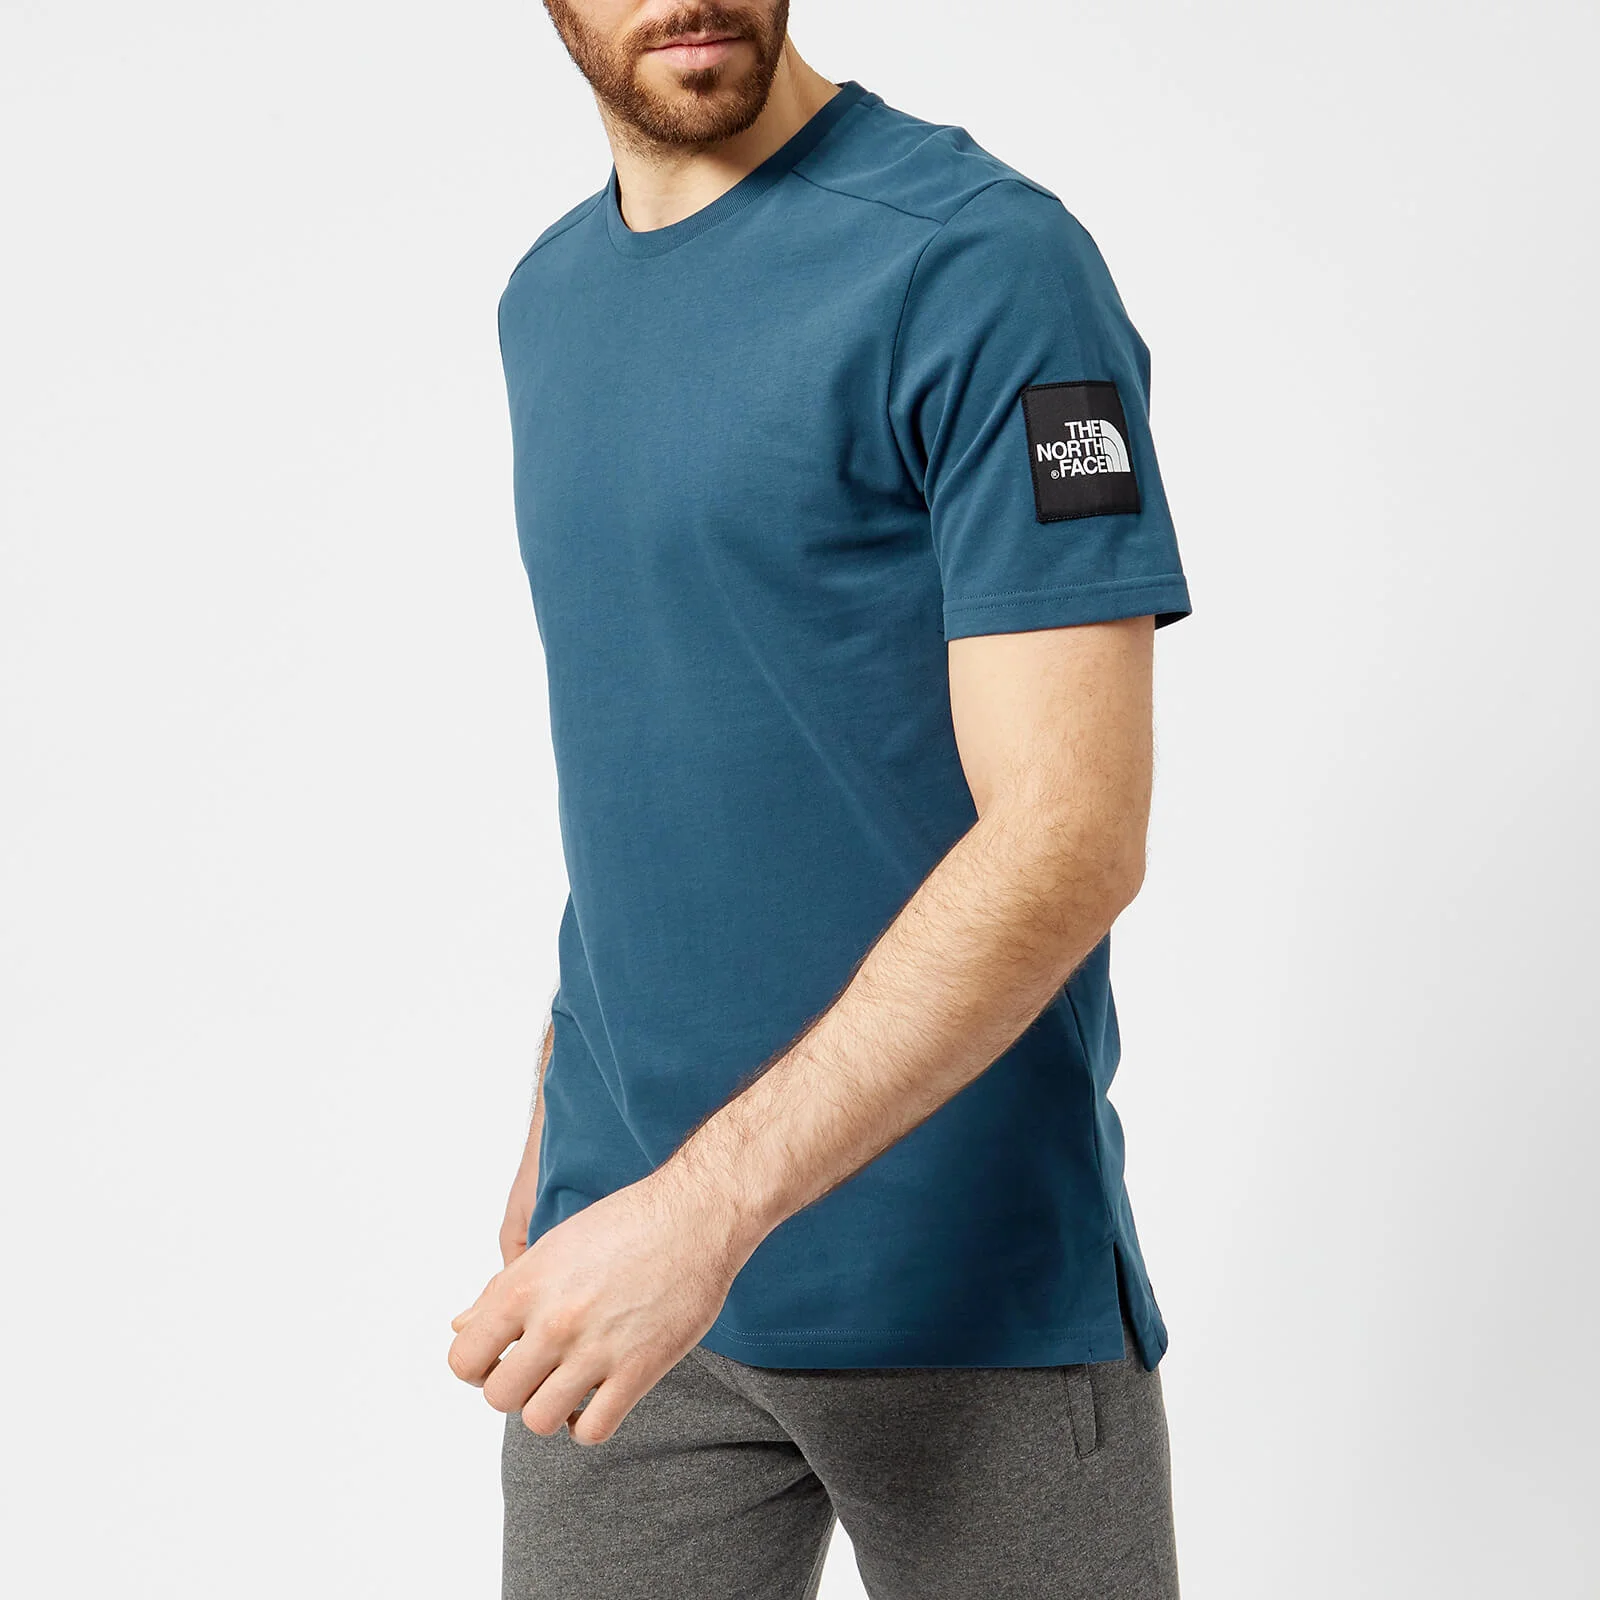 The North Face Men's Short Sleeve Fine 2 T-Shirt - Blue Wing Teal Image 1